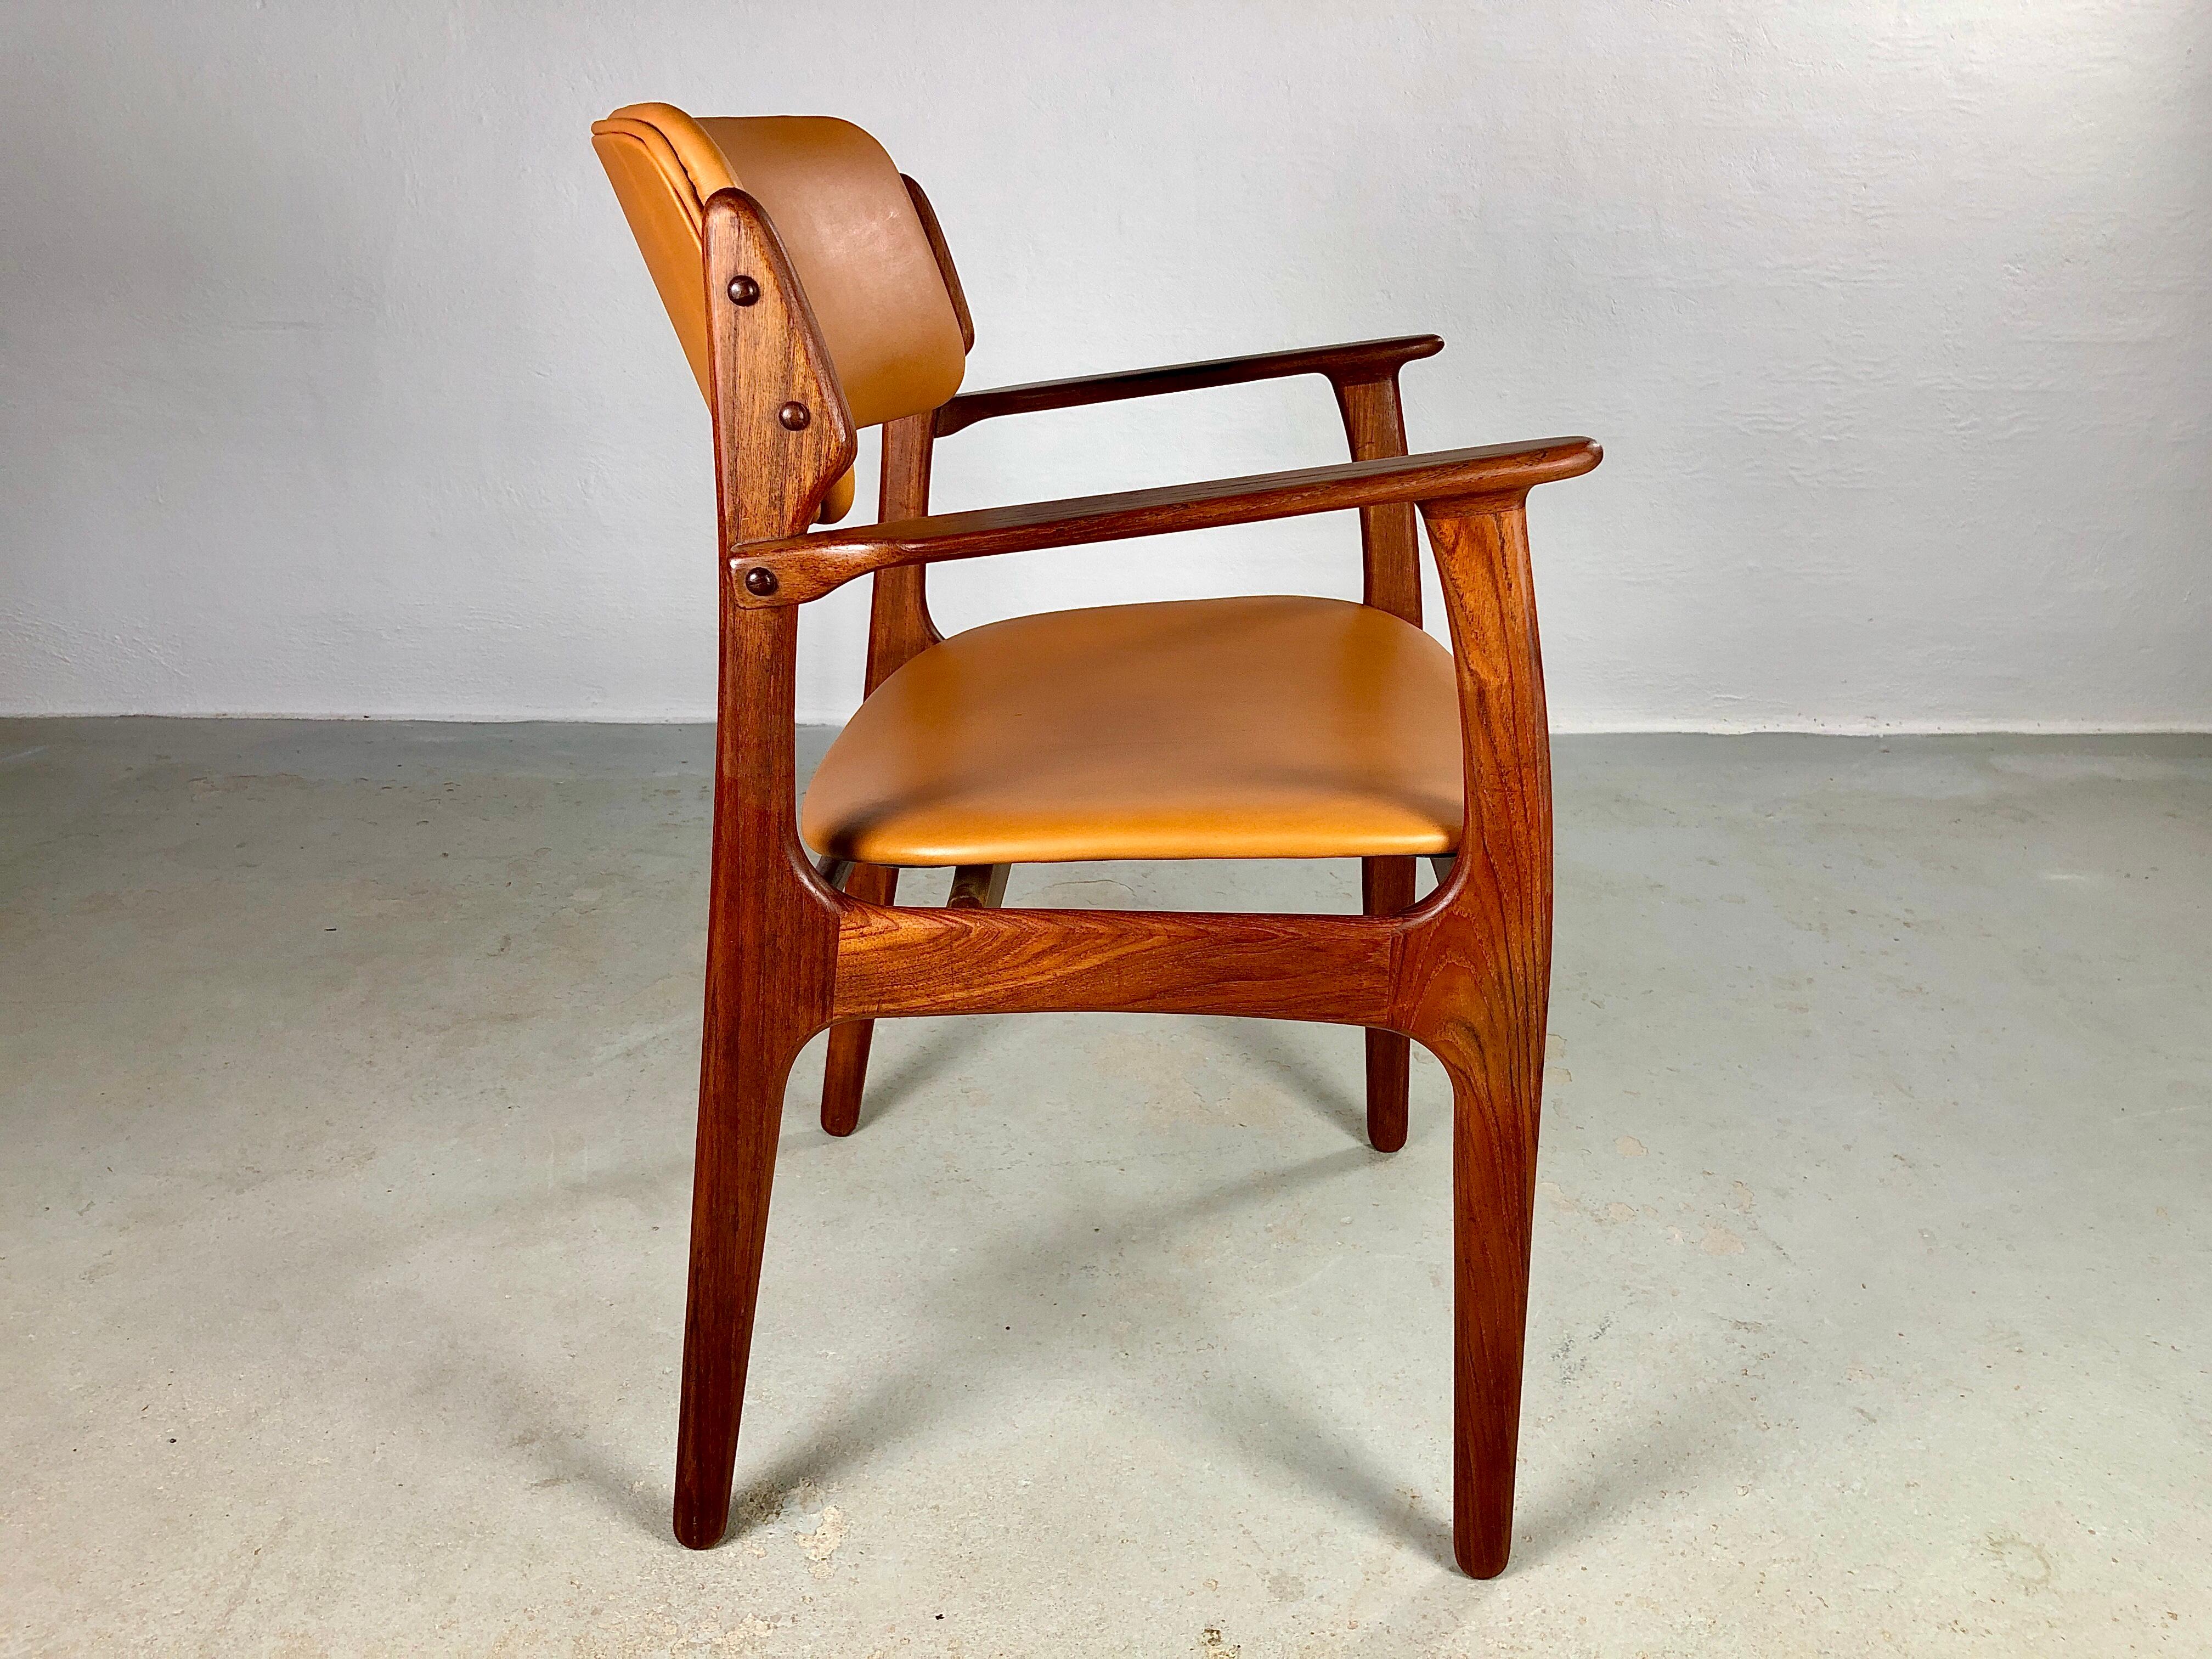 Erik Buch fully restored teak armchairs with excellent woodwork that are evidence of good mid-century Danish design and craftsmanship.

The chairs feature a solid teak with Erik Buch's characteristic floating seat and rounded backrest that ensures a